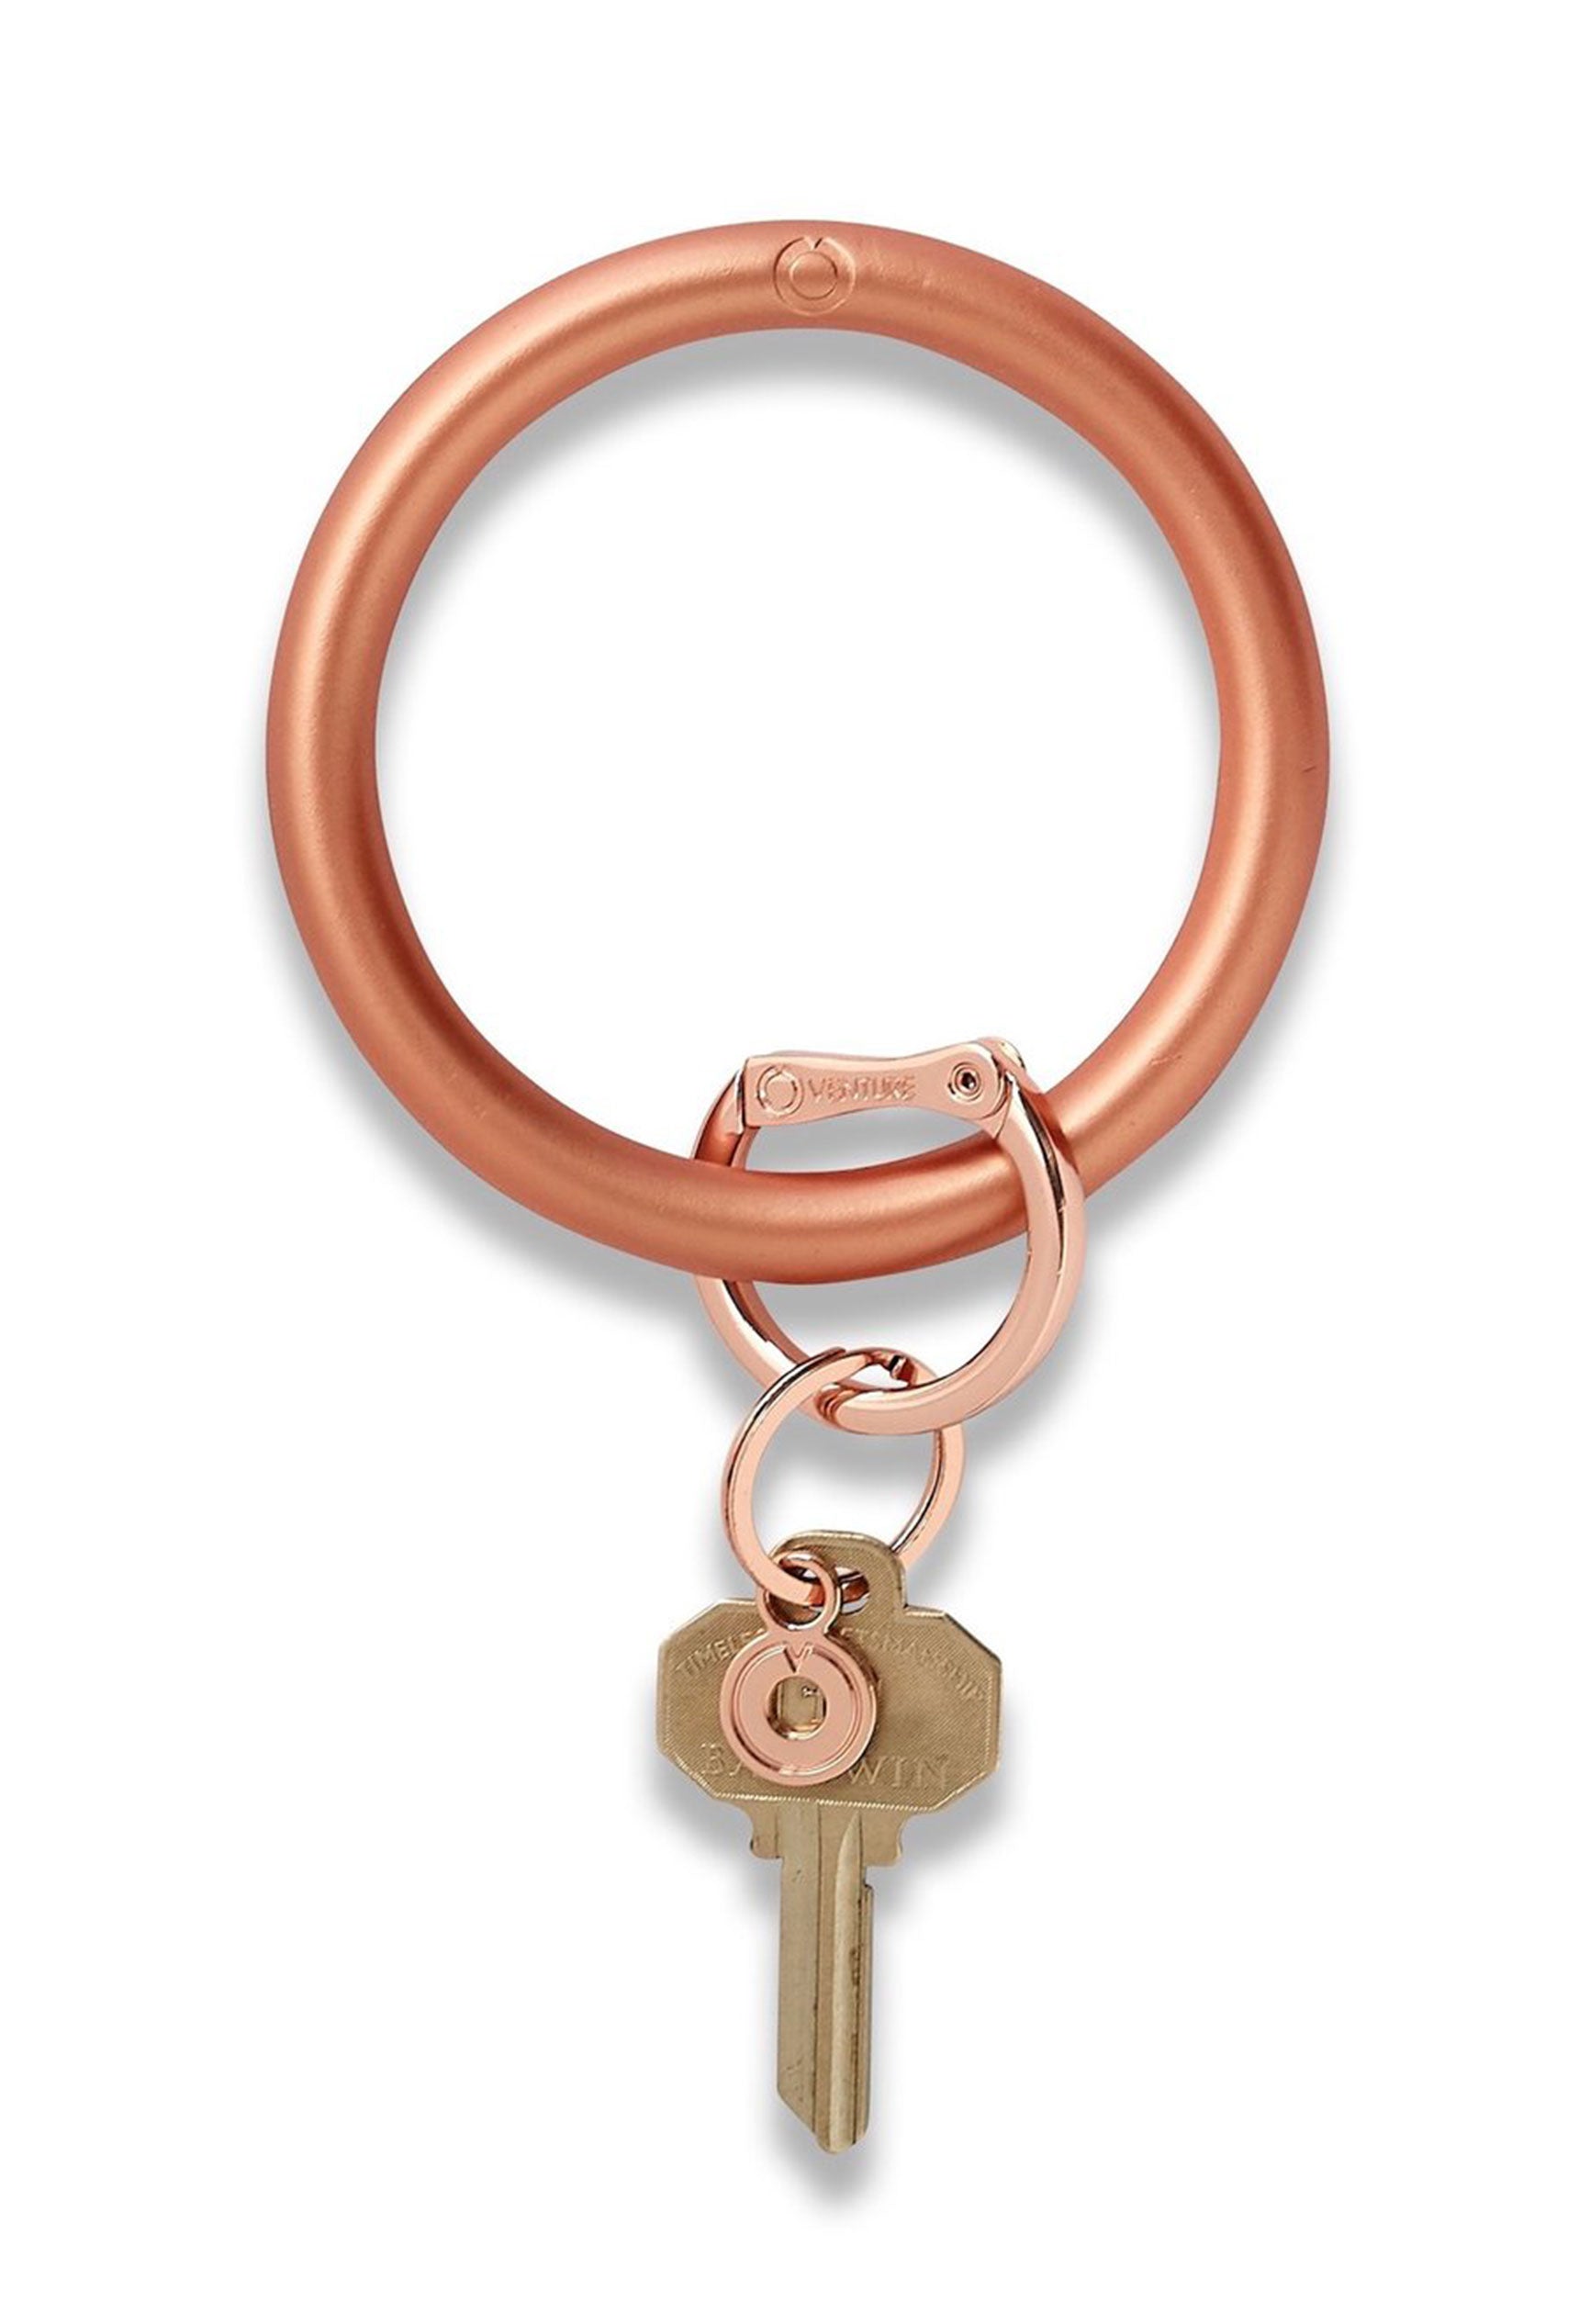 O-Venture Silicone Key Ring in Rose Gold, all rose gold metallic o-venture wrist key ring 